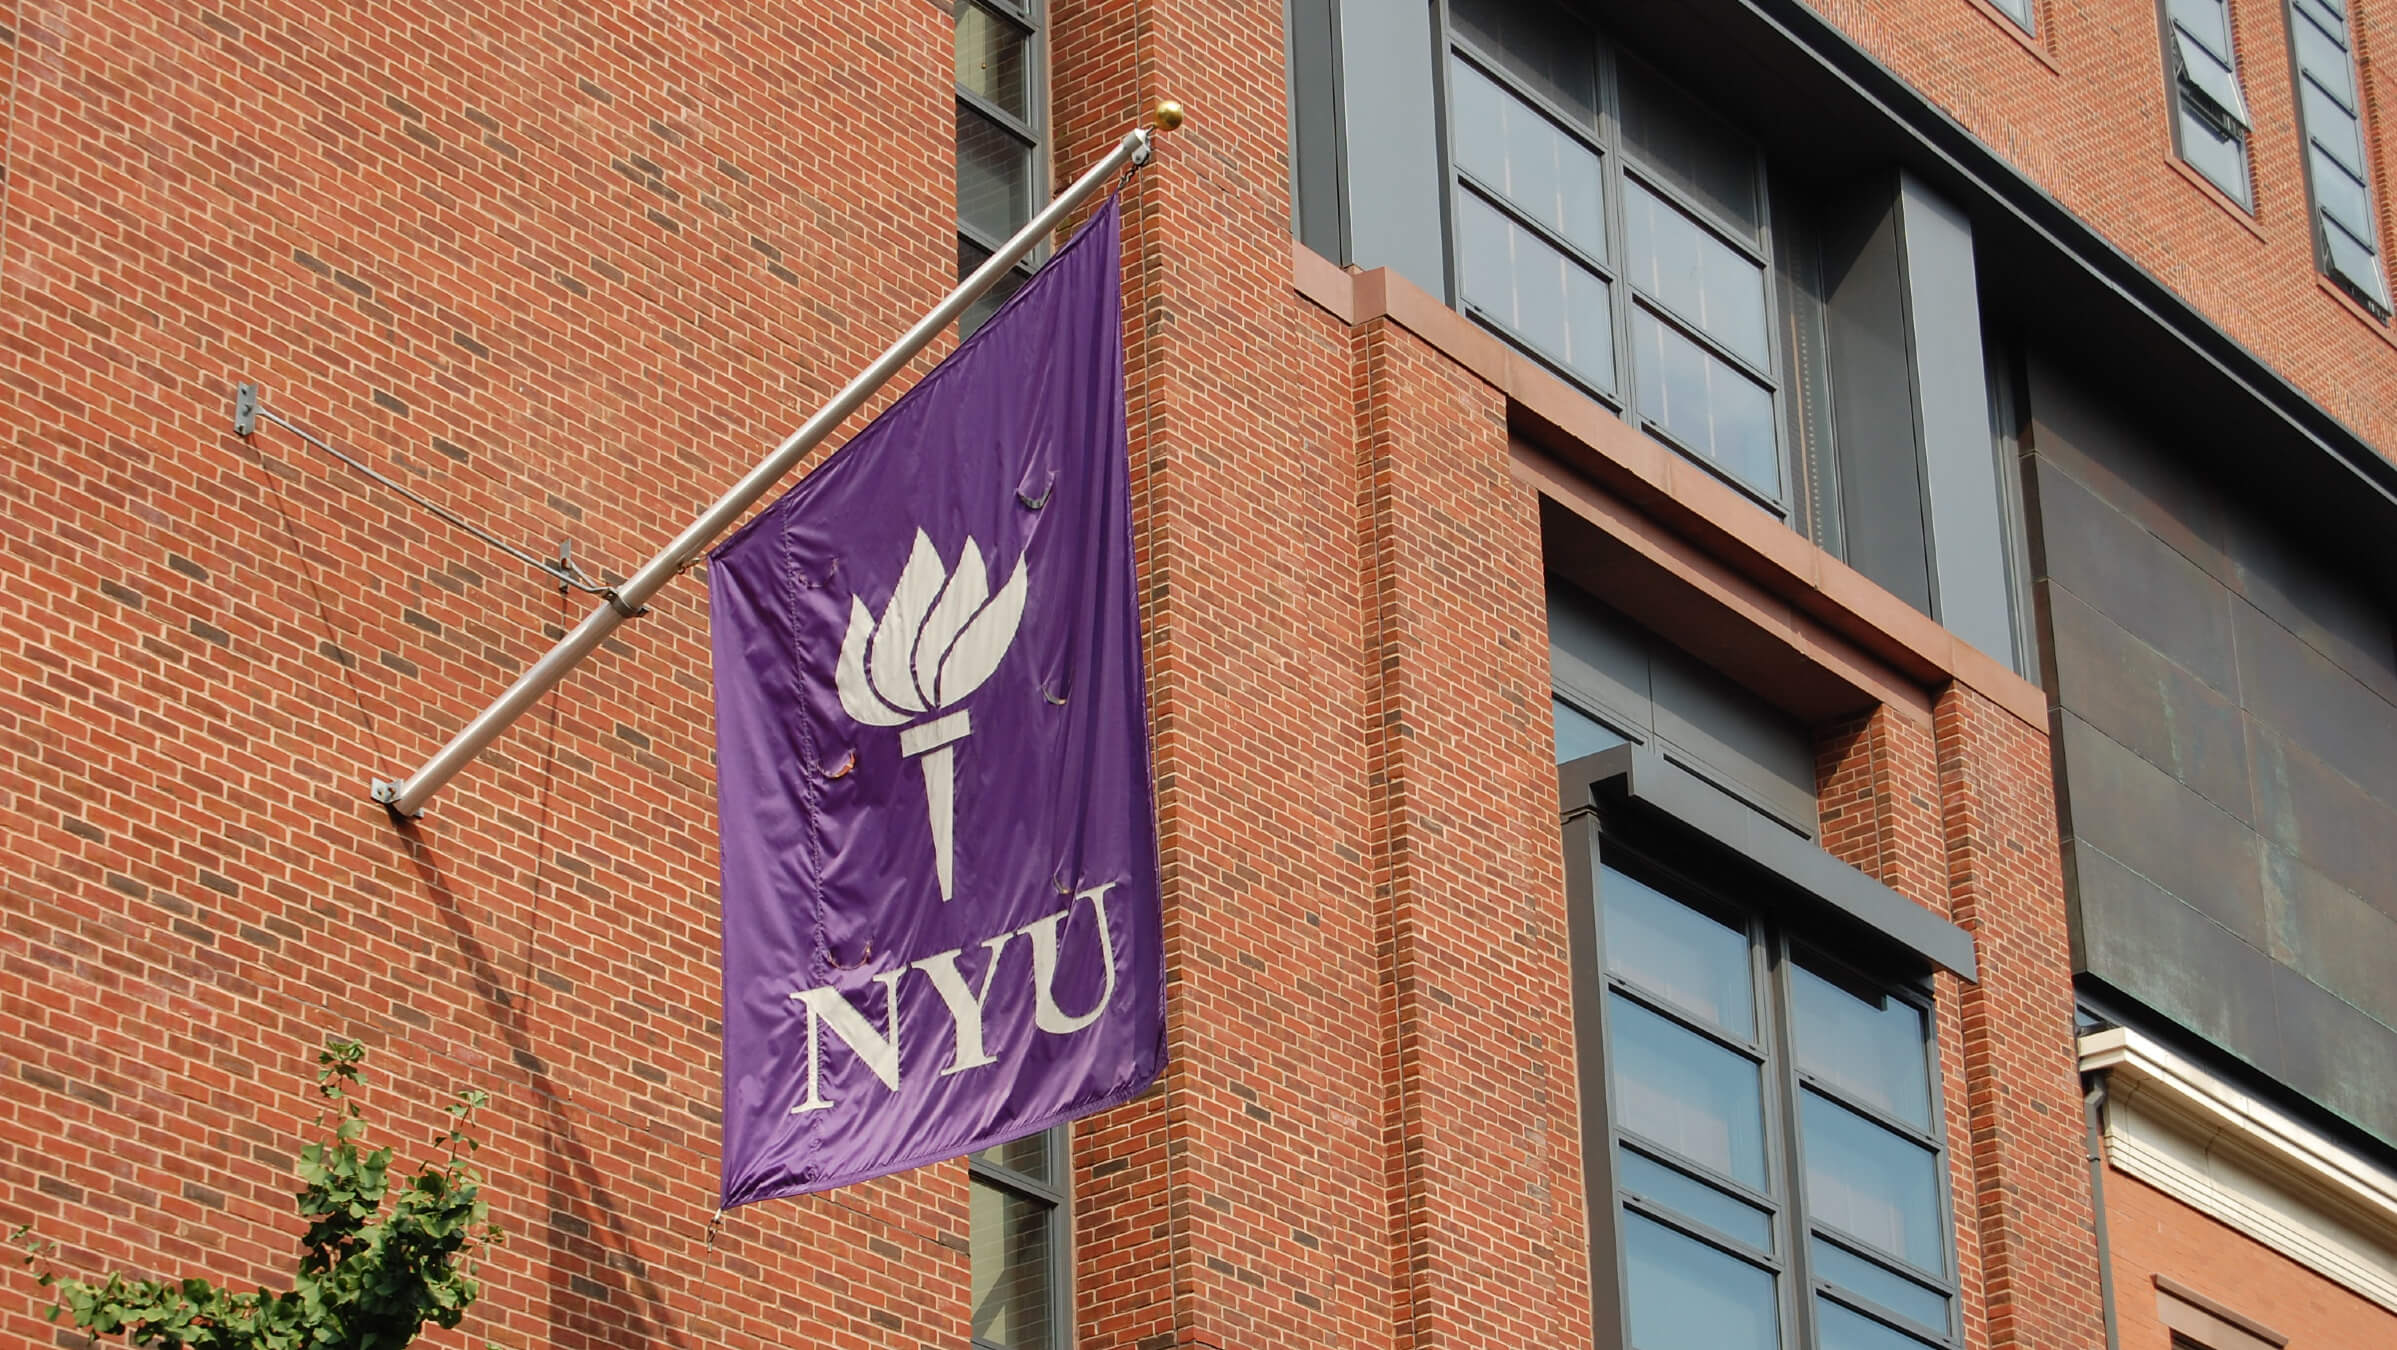 The New York University flag flies on a campus building.